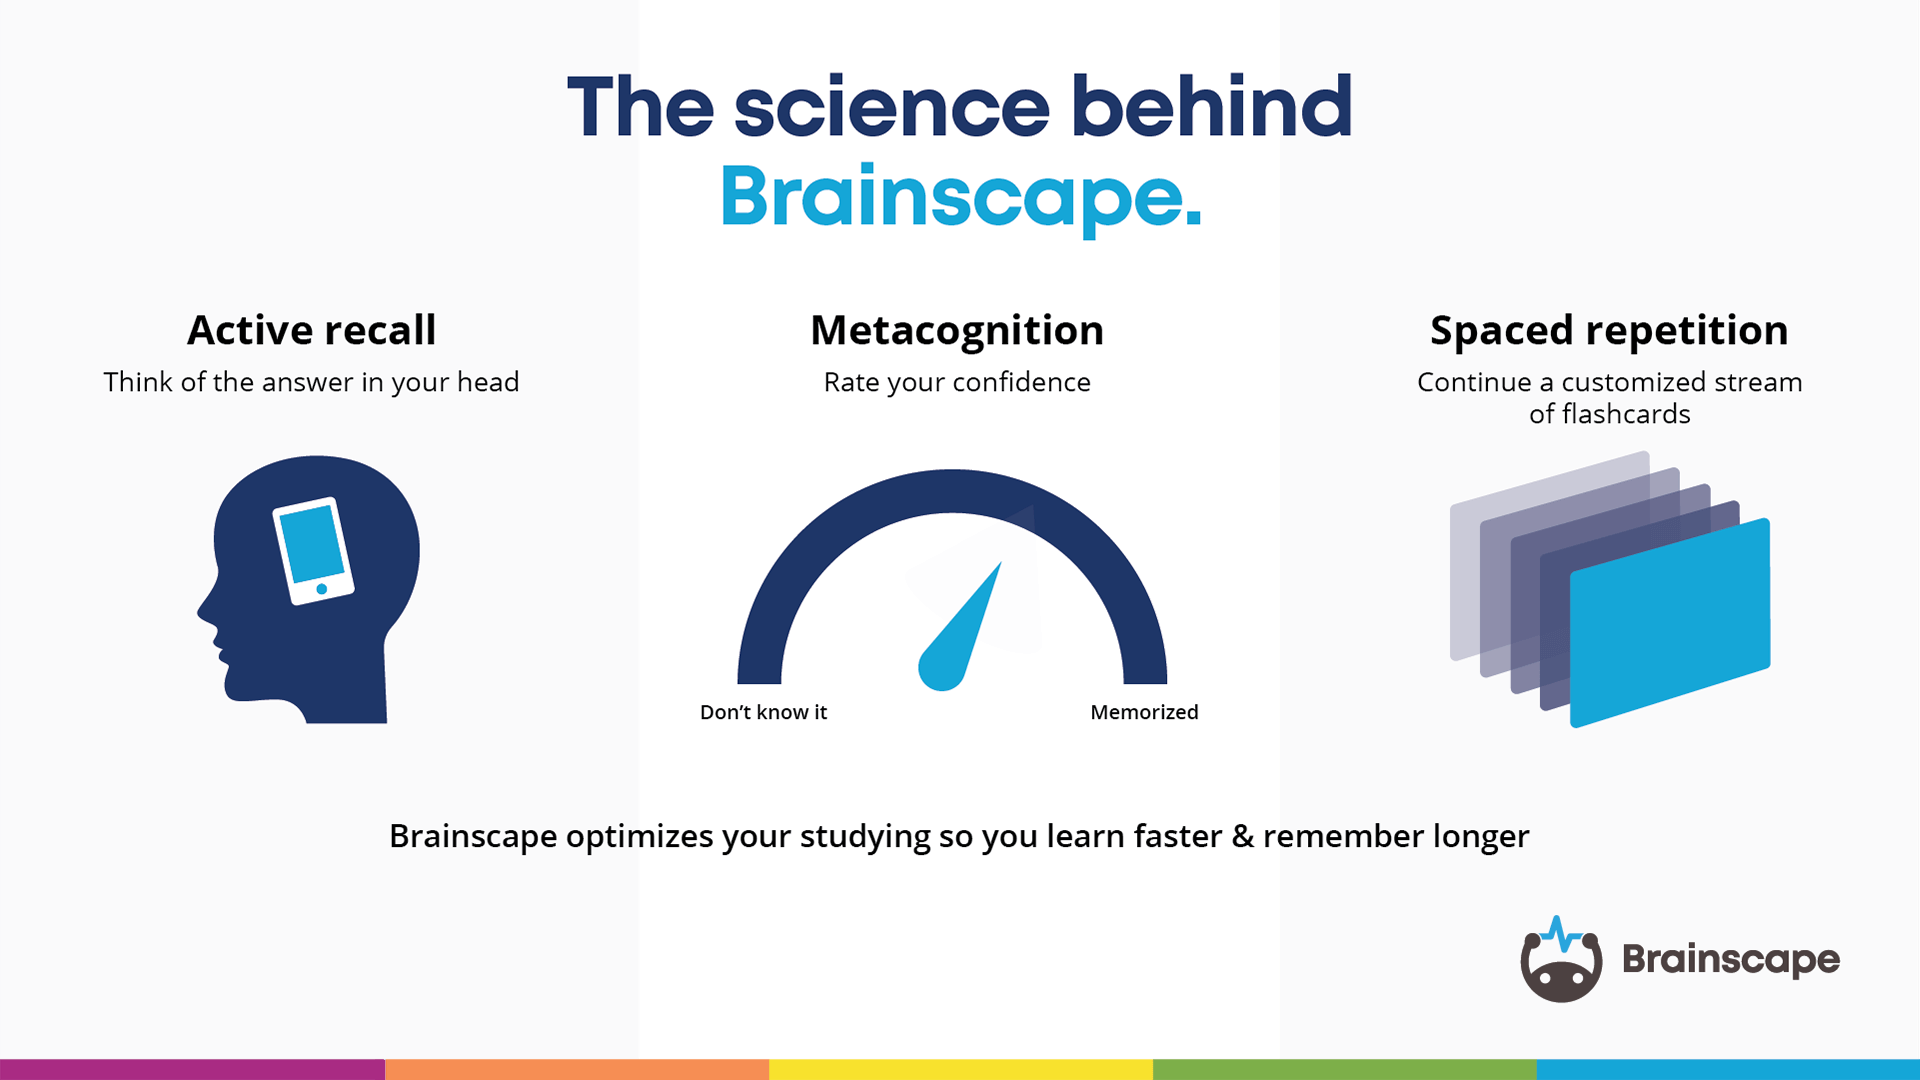 The science behind Brainscape